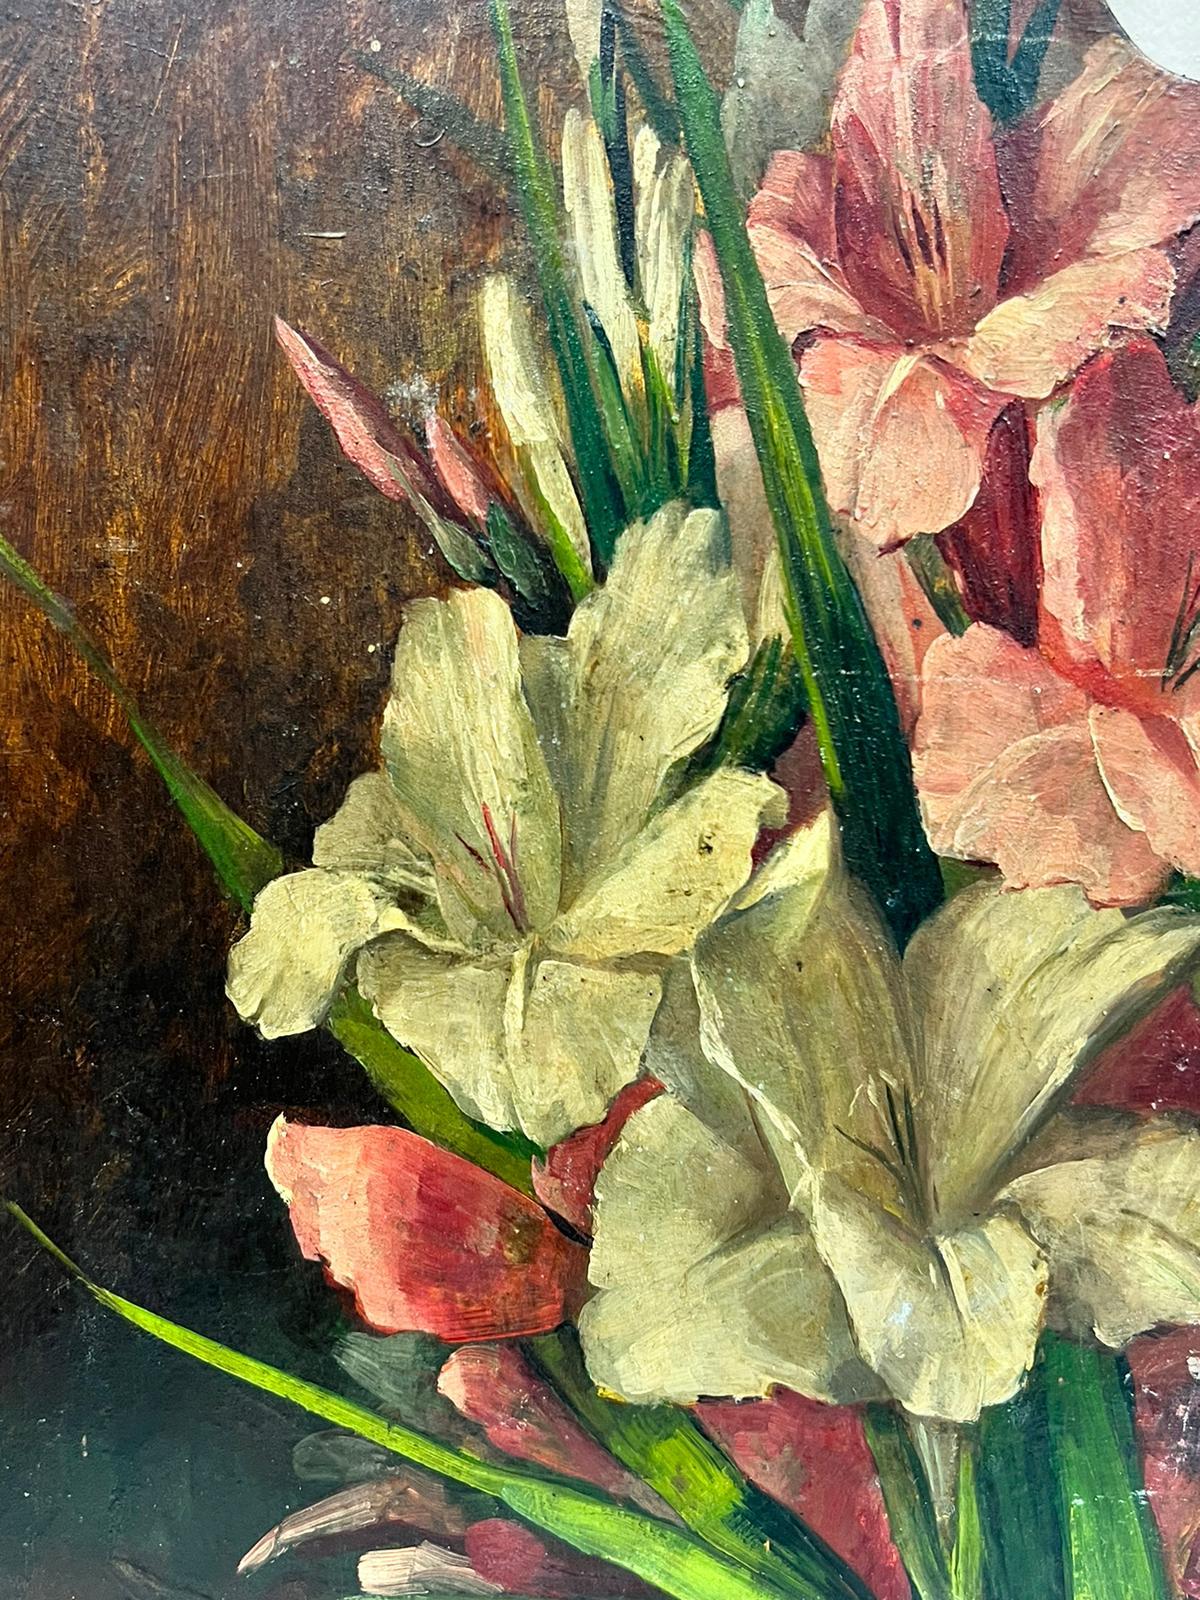 Vintage French artist’s wooden palette
Still life of flowers
oil on wood
13 x 9.5 inches approximately 
private collection, France (Provence)
the painting is in overall good and sound condition, minor surface scratching 